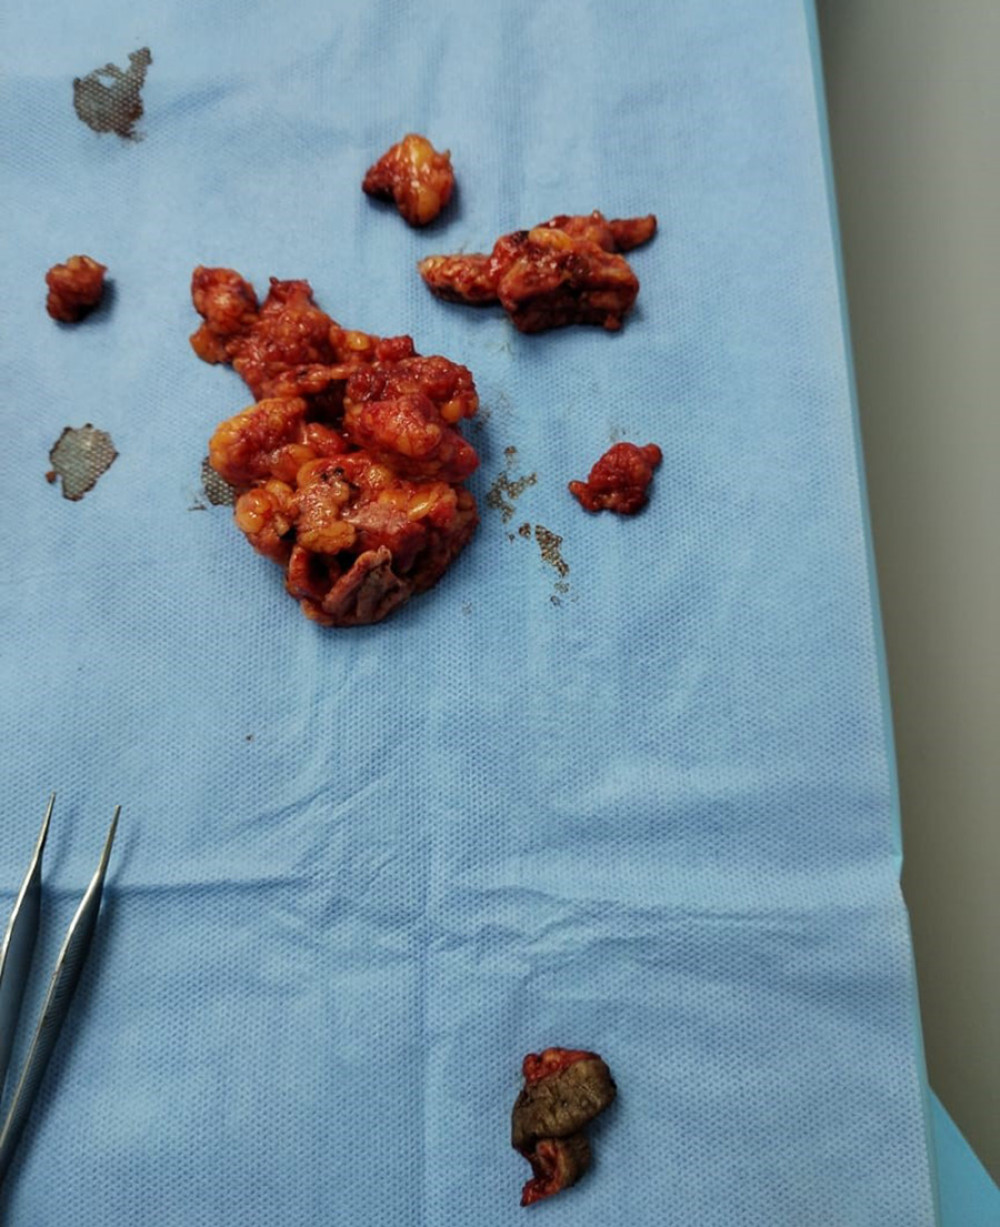 Photograph of the excised mass of the endometrioma.